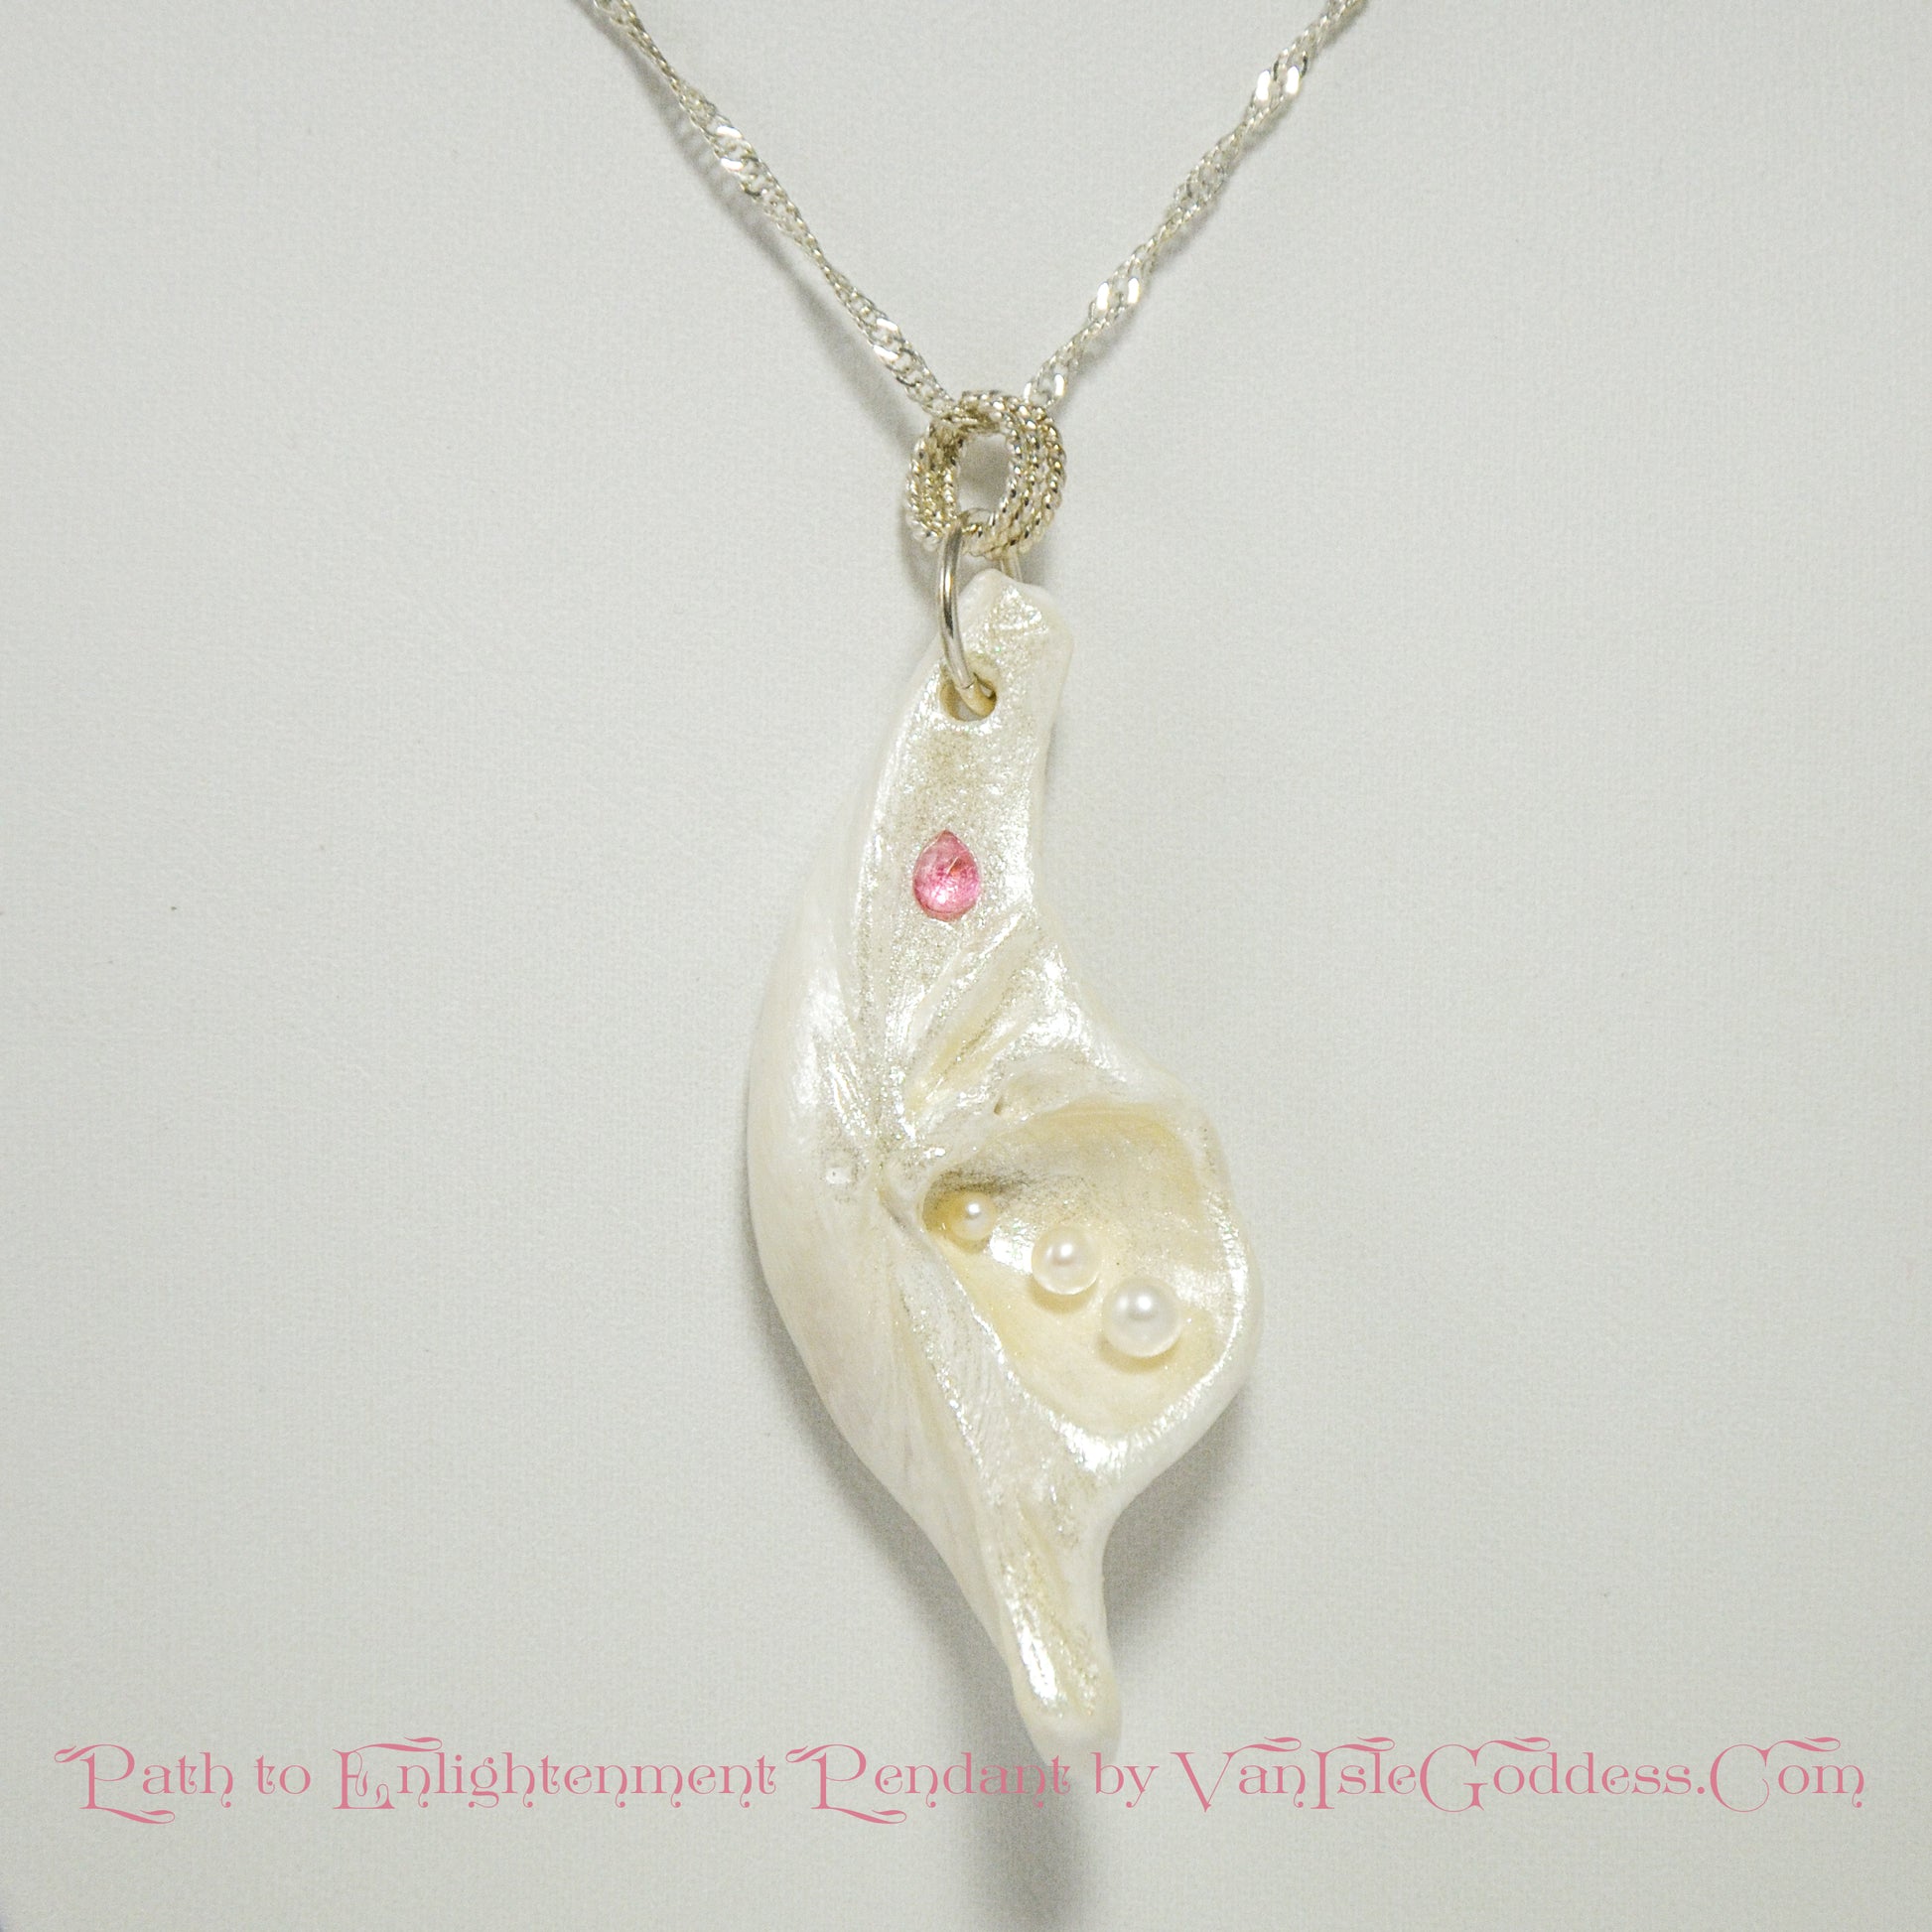 A trio of white baby freshwater pearls and a teardrop rose cut pink tourmaline gemstone compliments the seashell pendant beautifully.